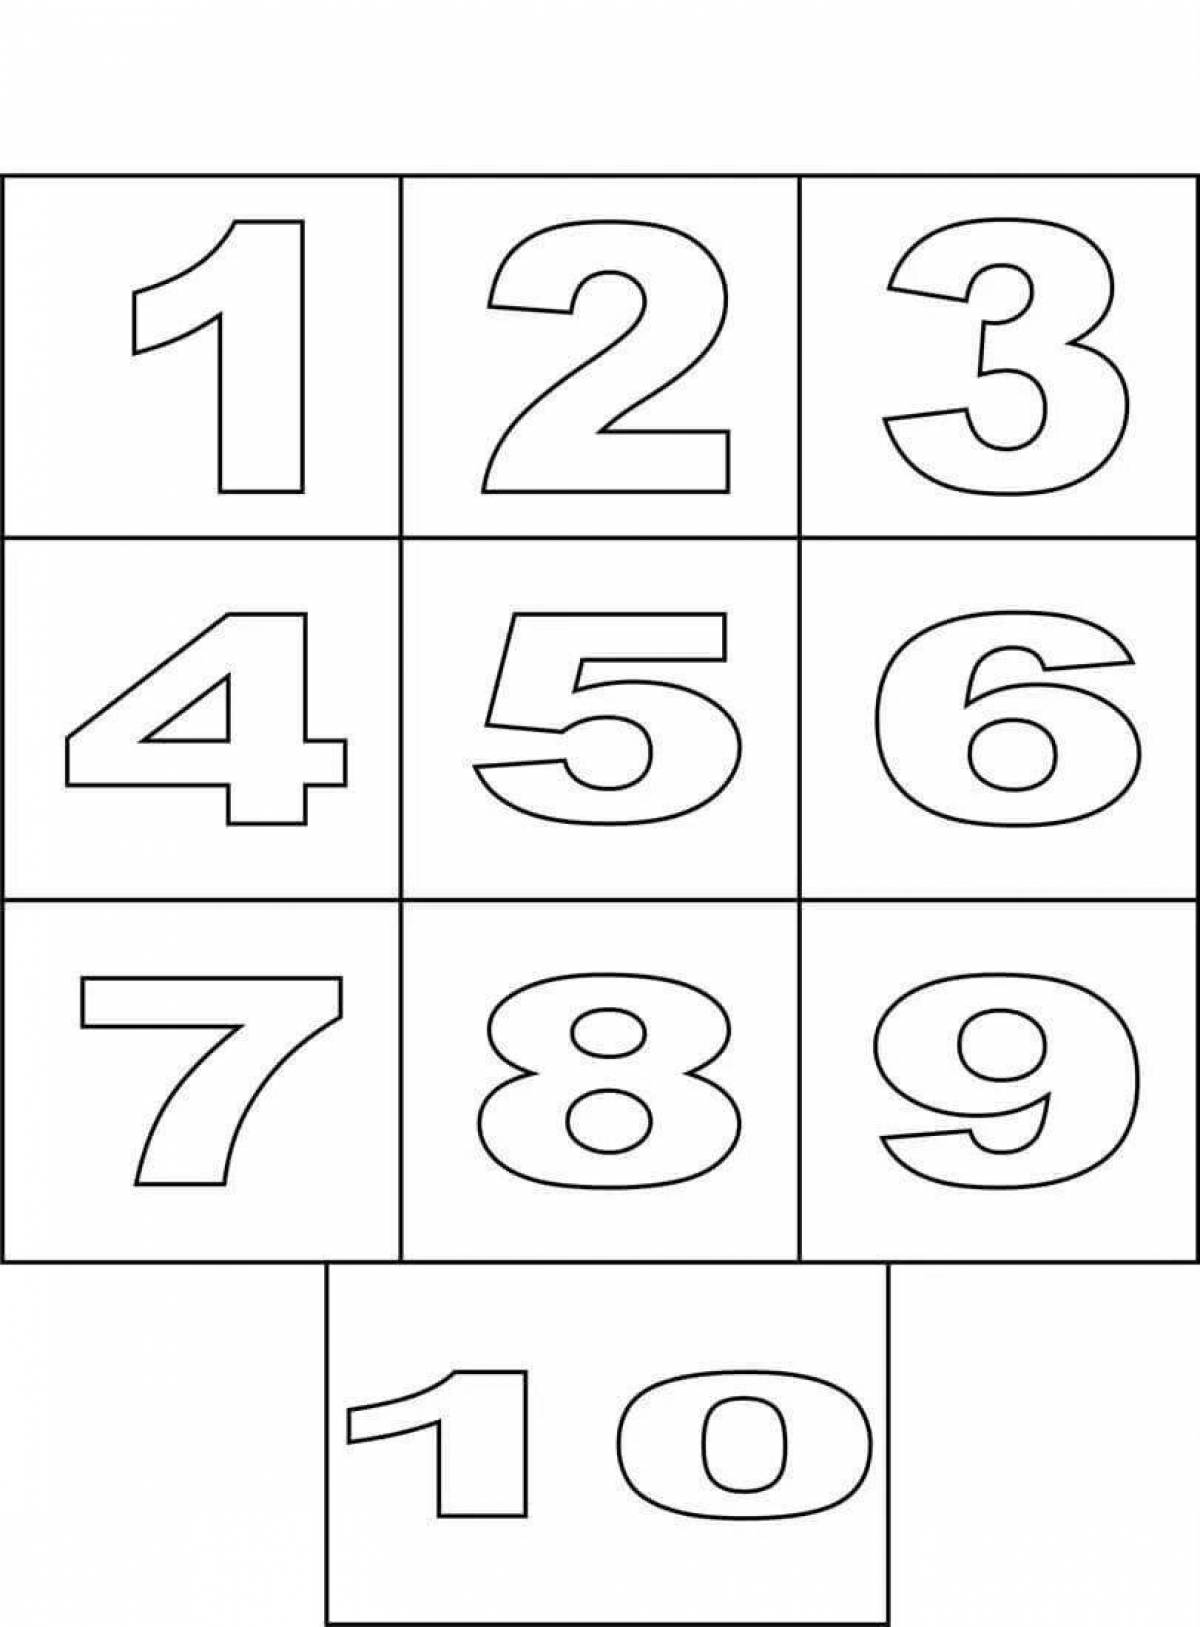 Colorful coloring page numbers up to 20